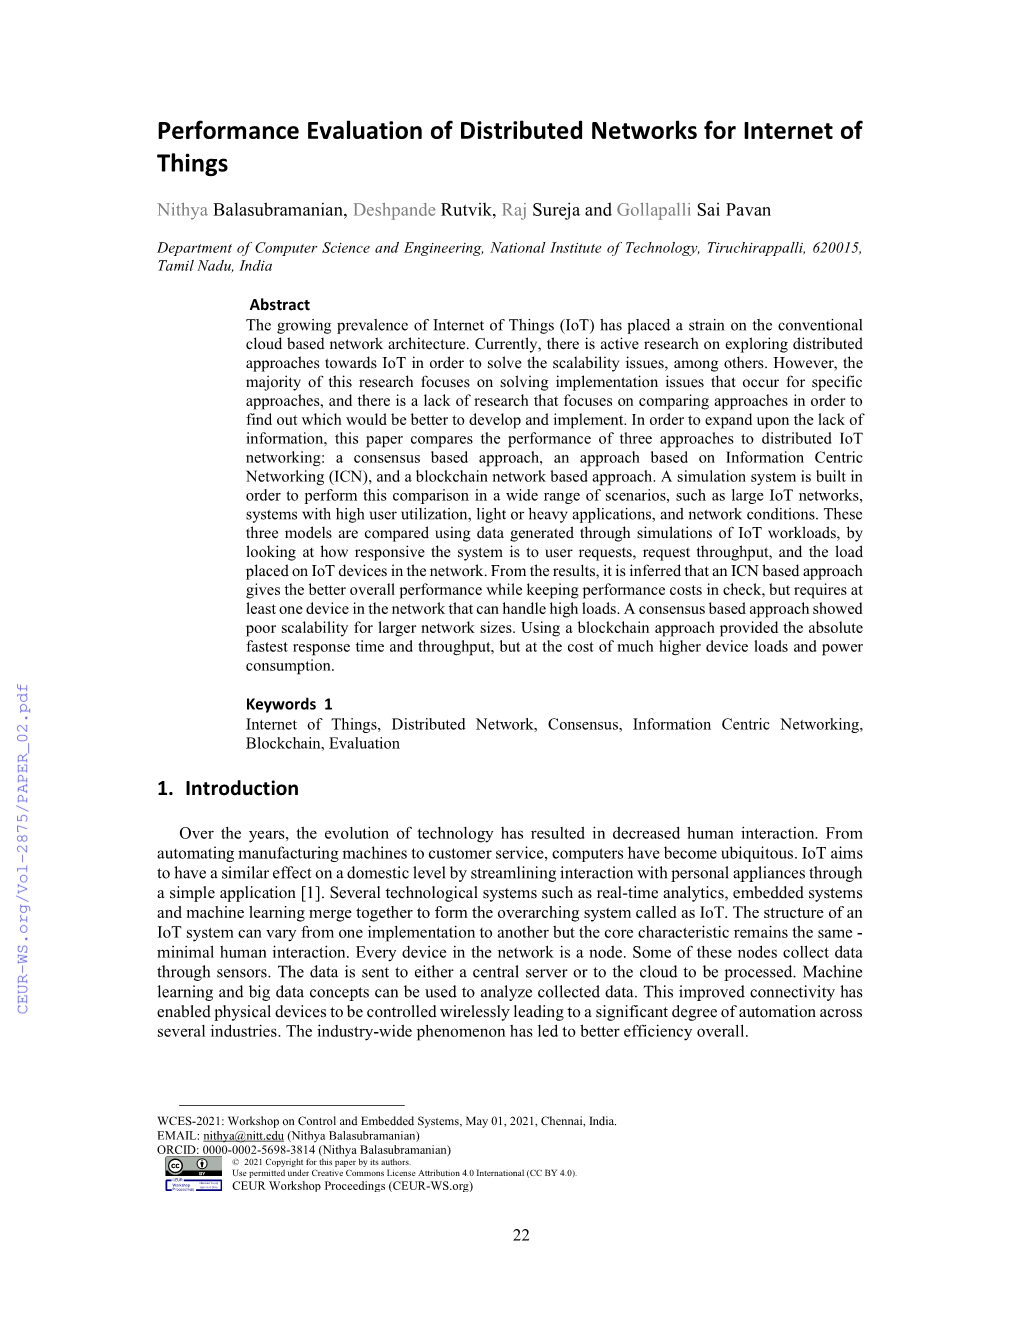 Performance Evaluation of Distributed Networks for Internet of Things